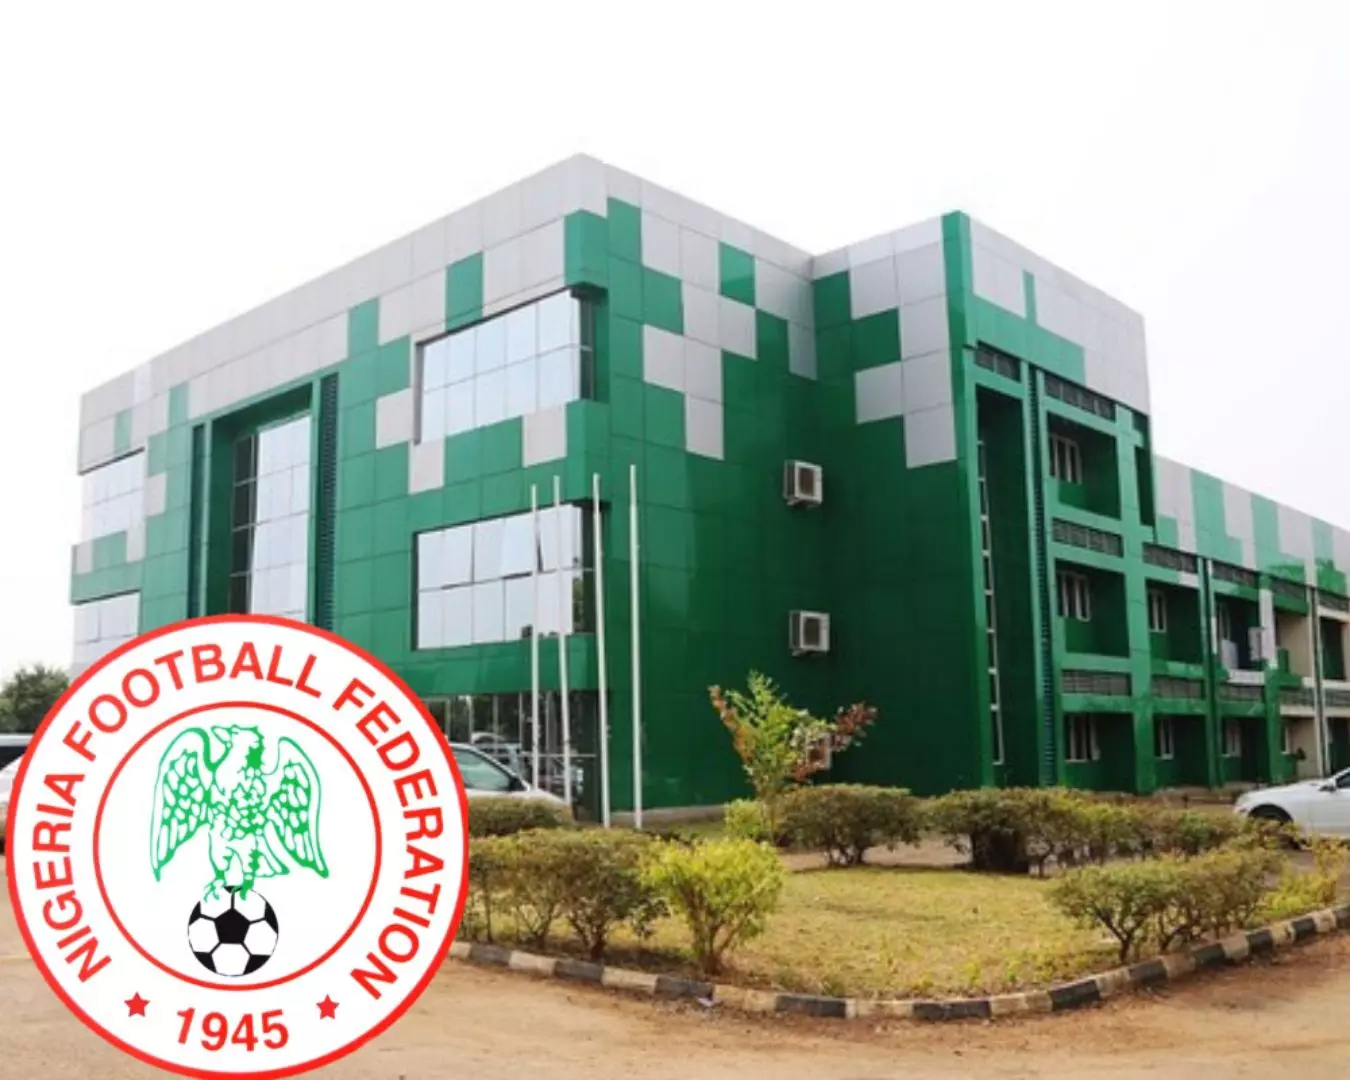 NFF elections: FG asks football stakeholders to abide by court order